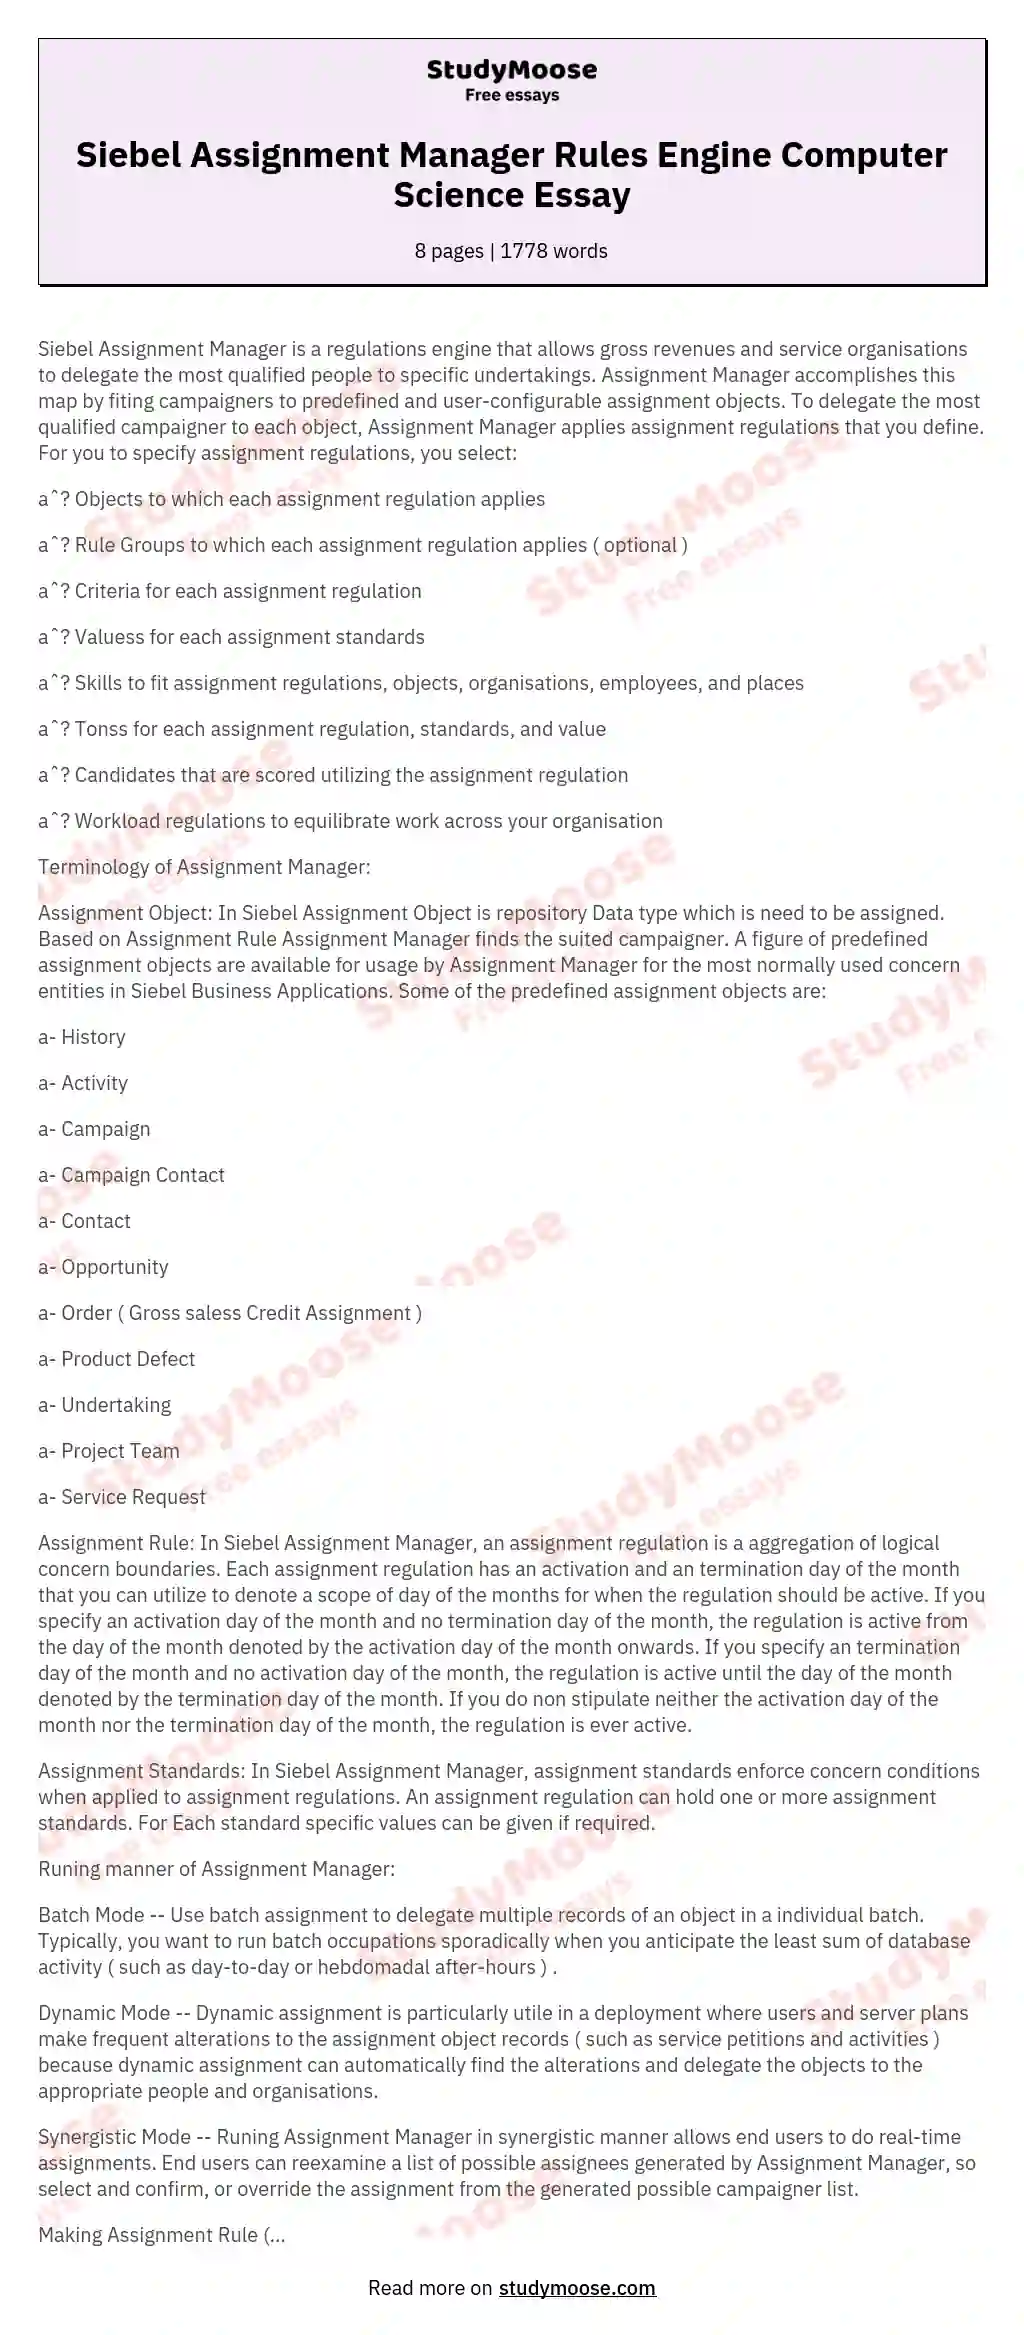 Siebel Assignment Manager Rules Engine Computer Science Essay essay